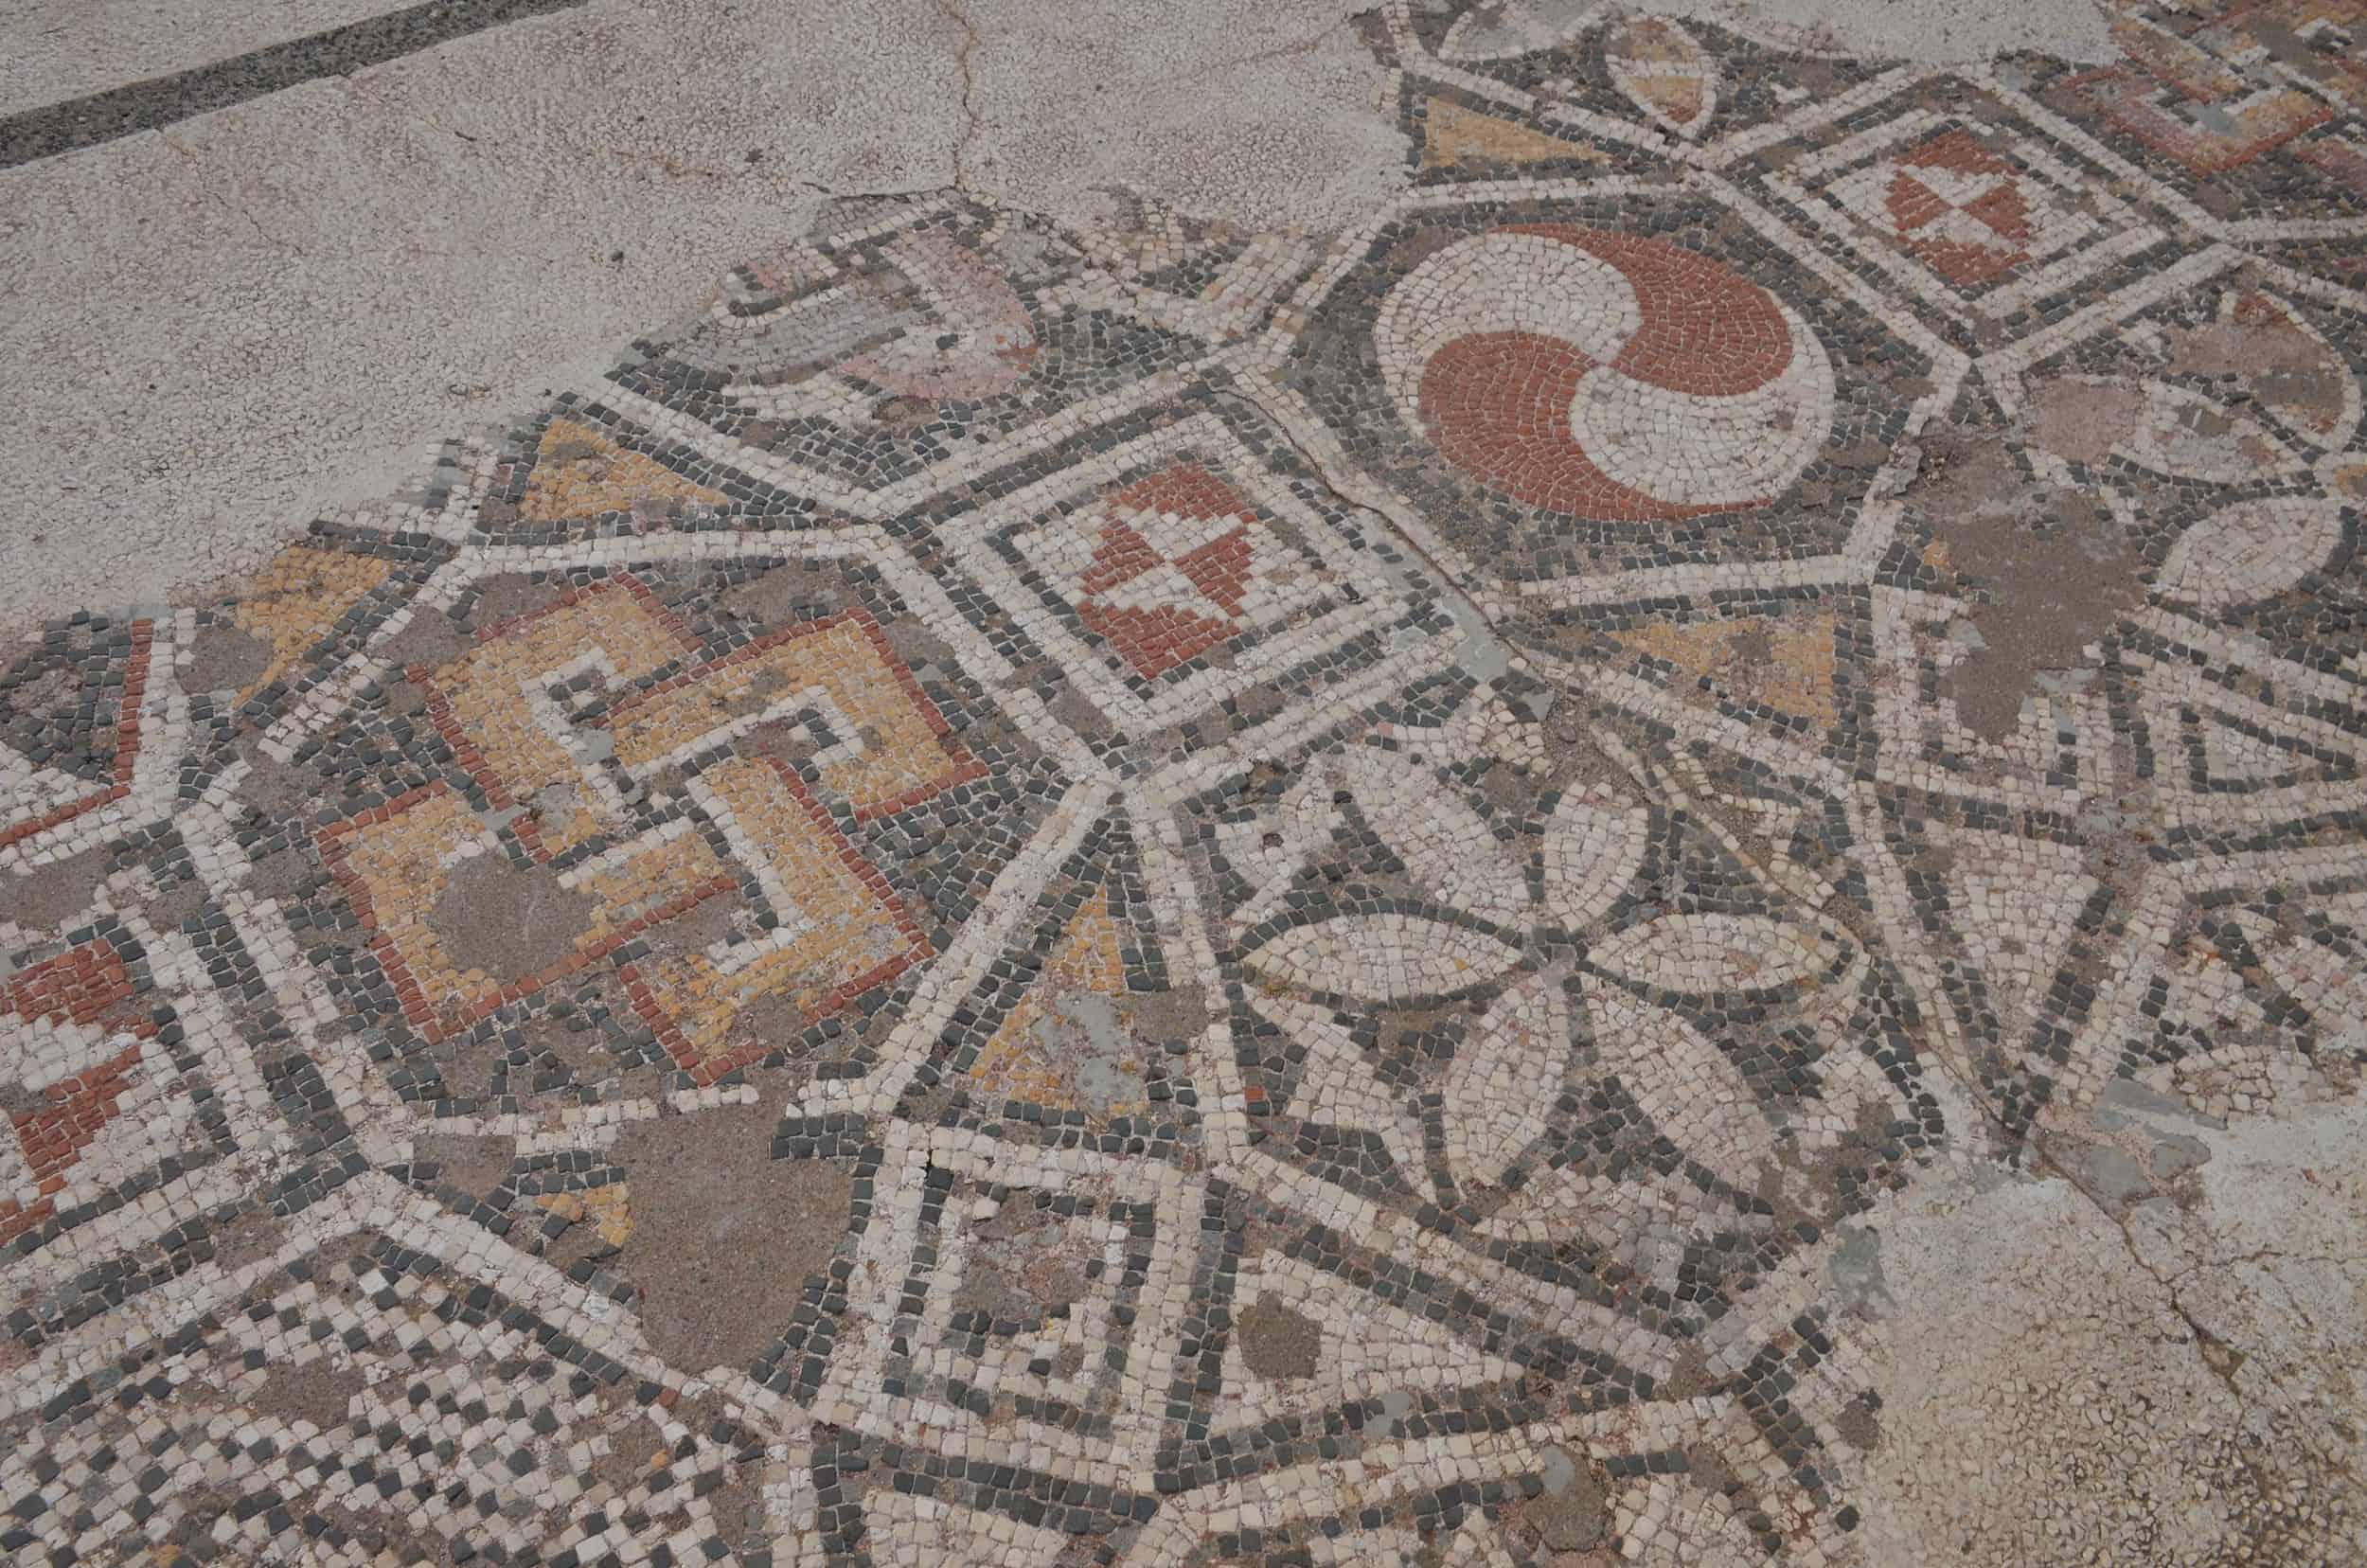 Mosaic floor in the forecourt of the Sardis Synagogue